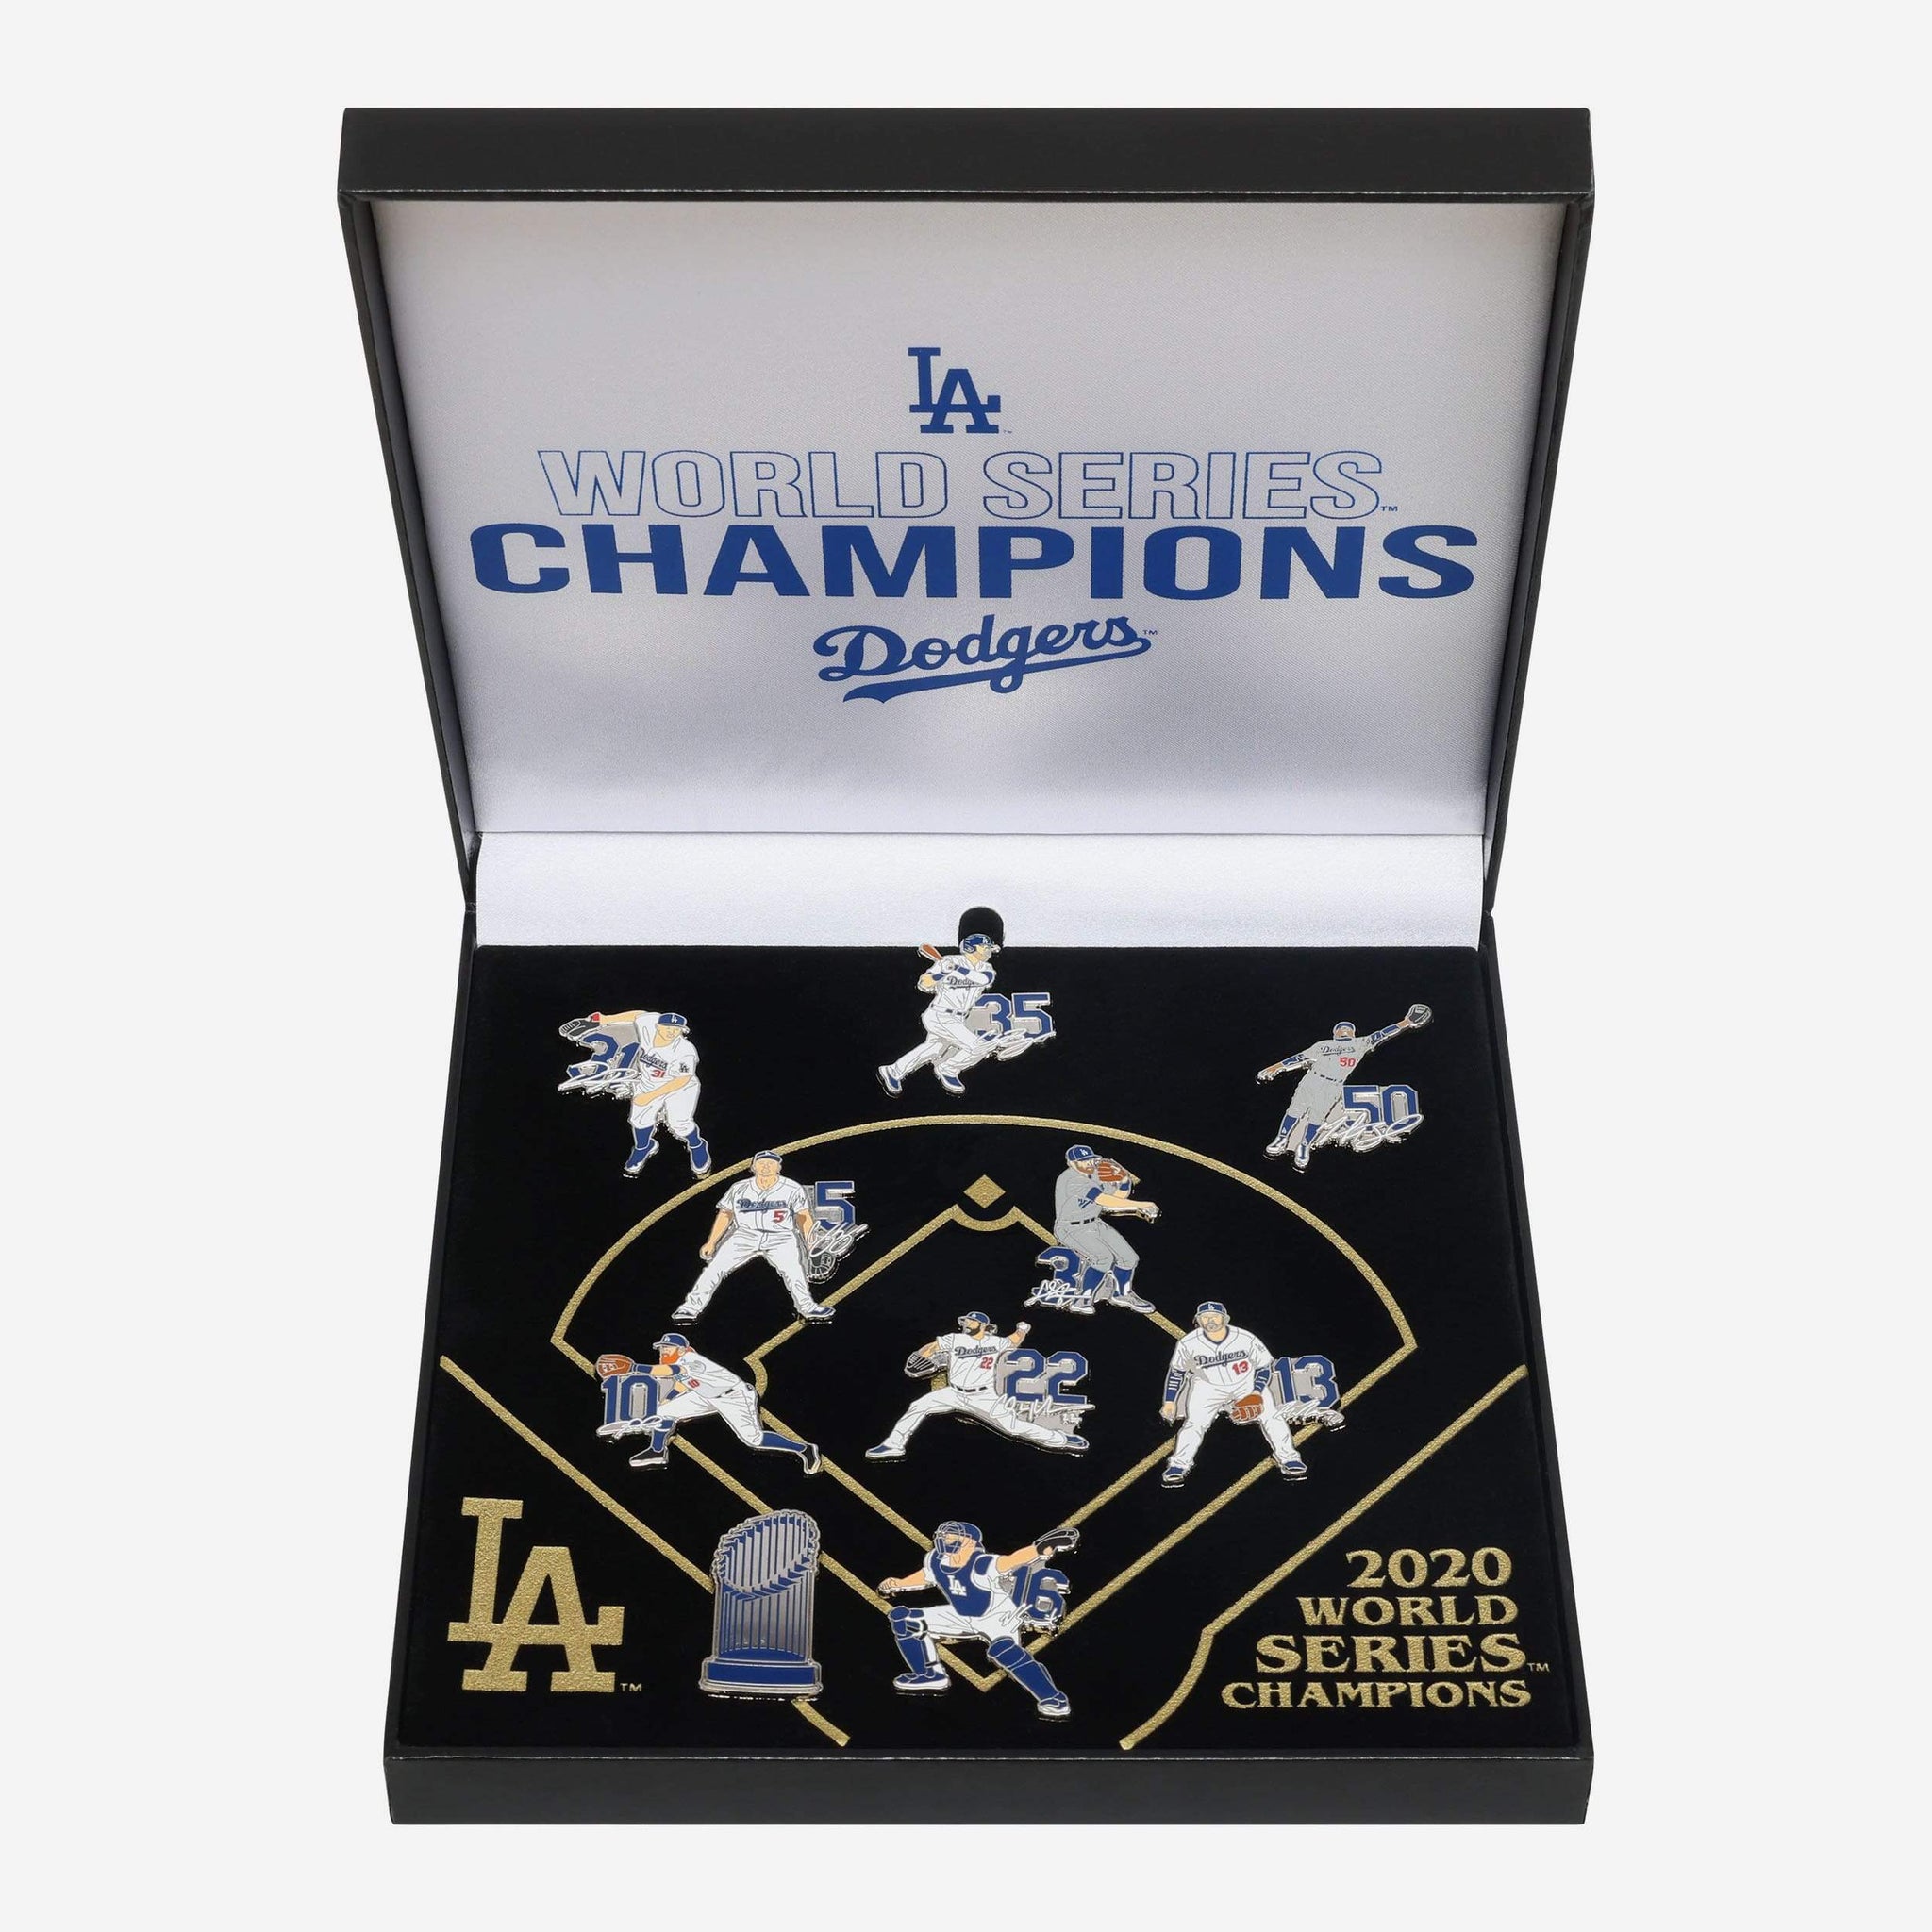 2020 Los Angeles Dodgers World Series ring details 